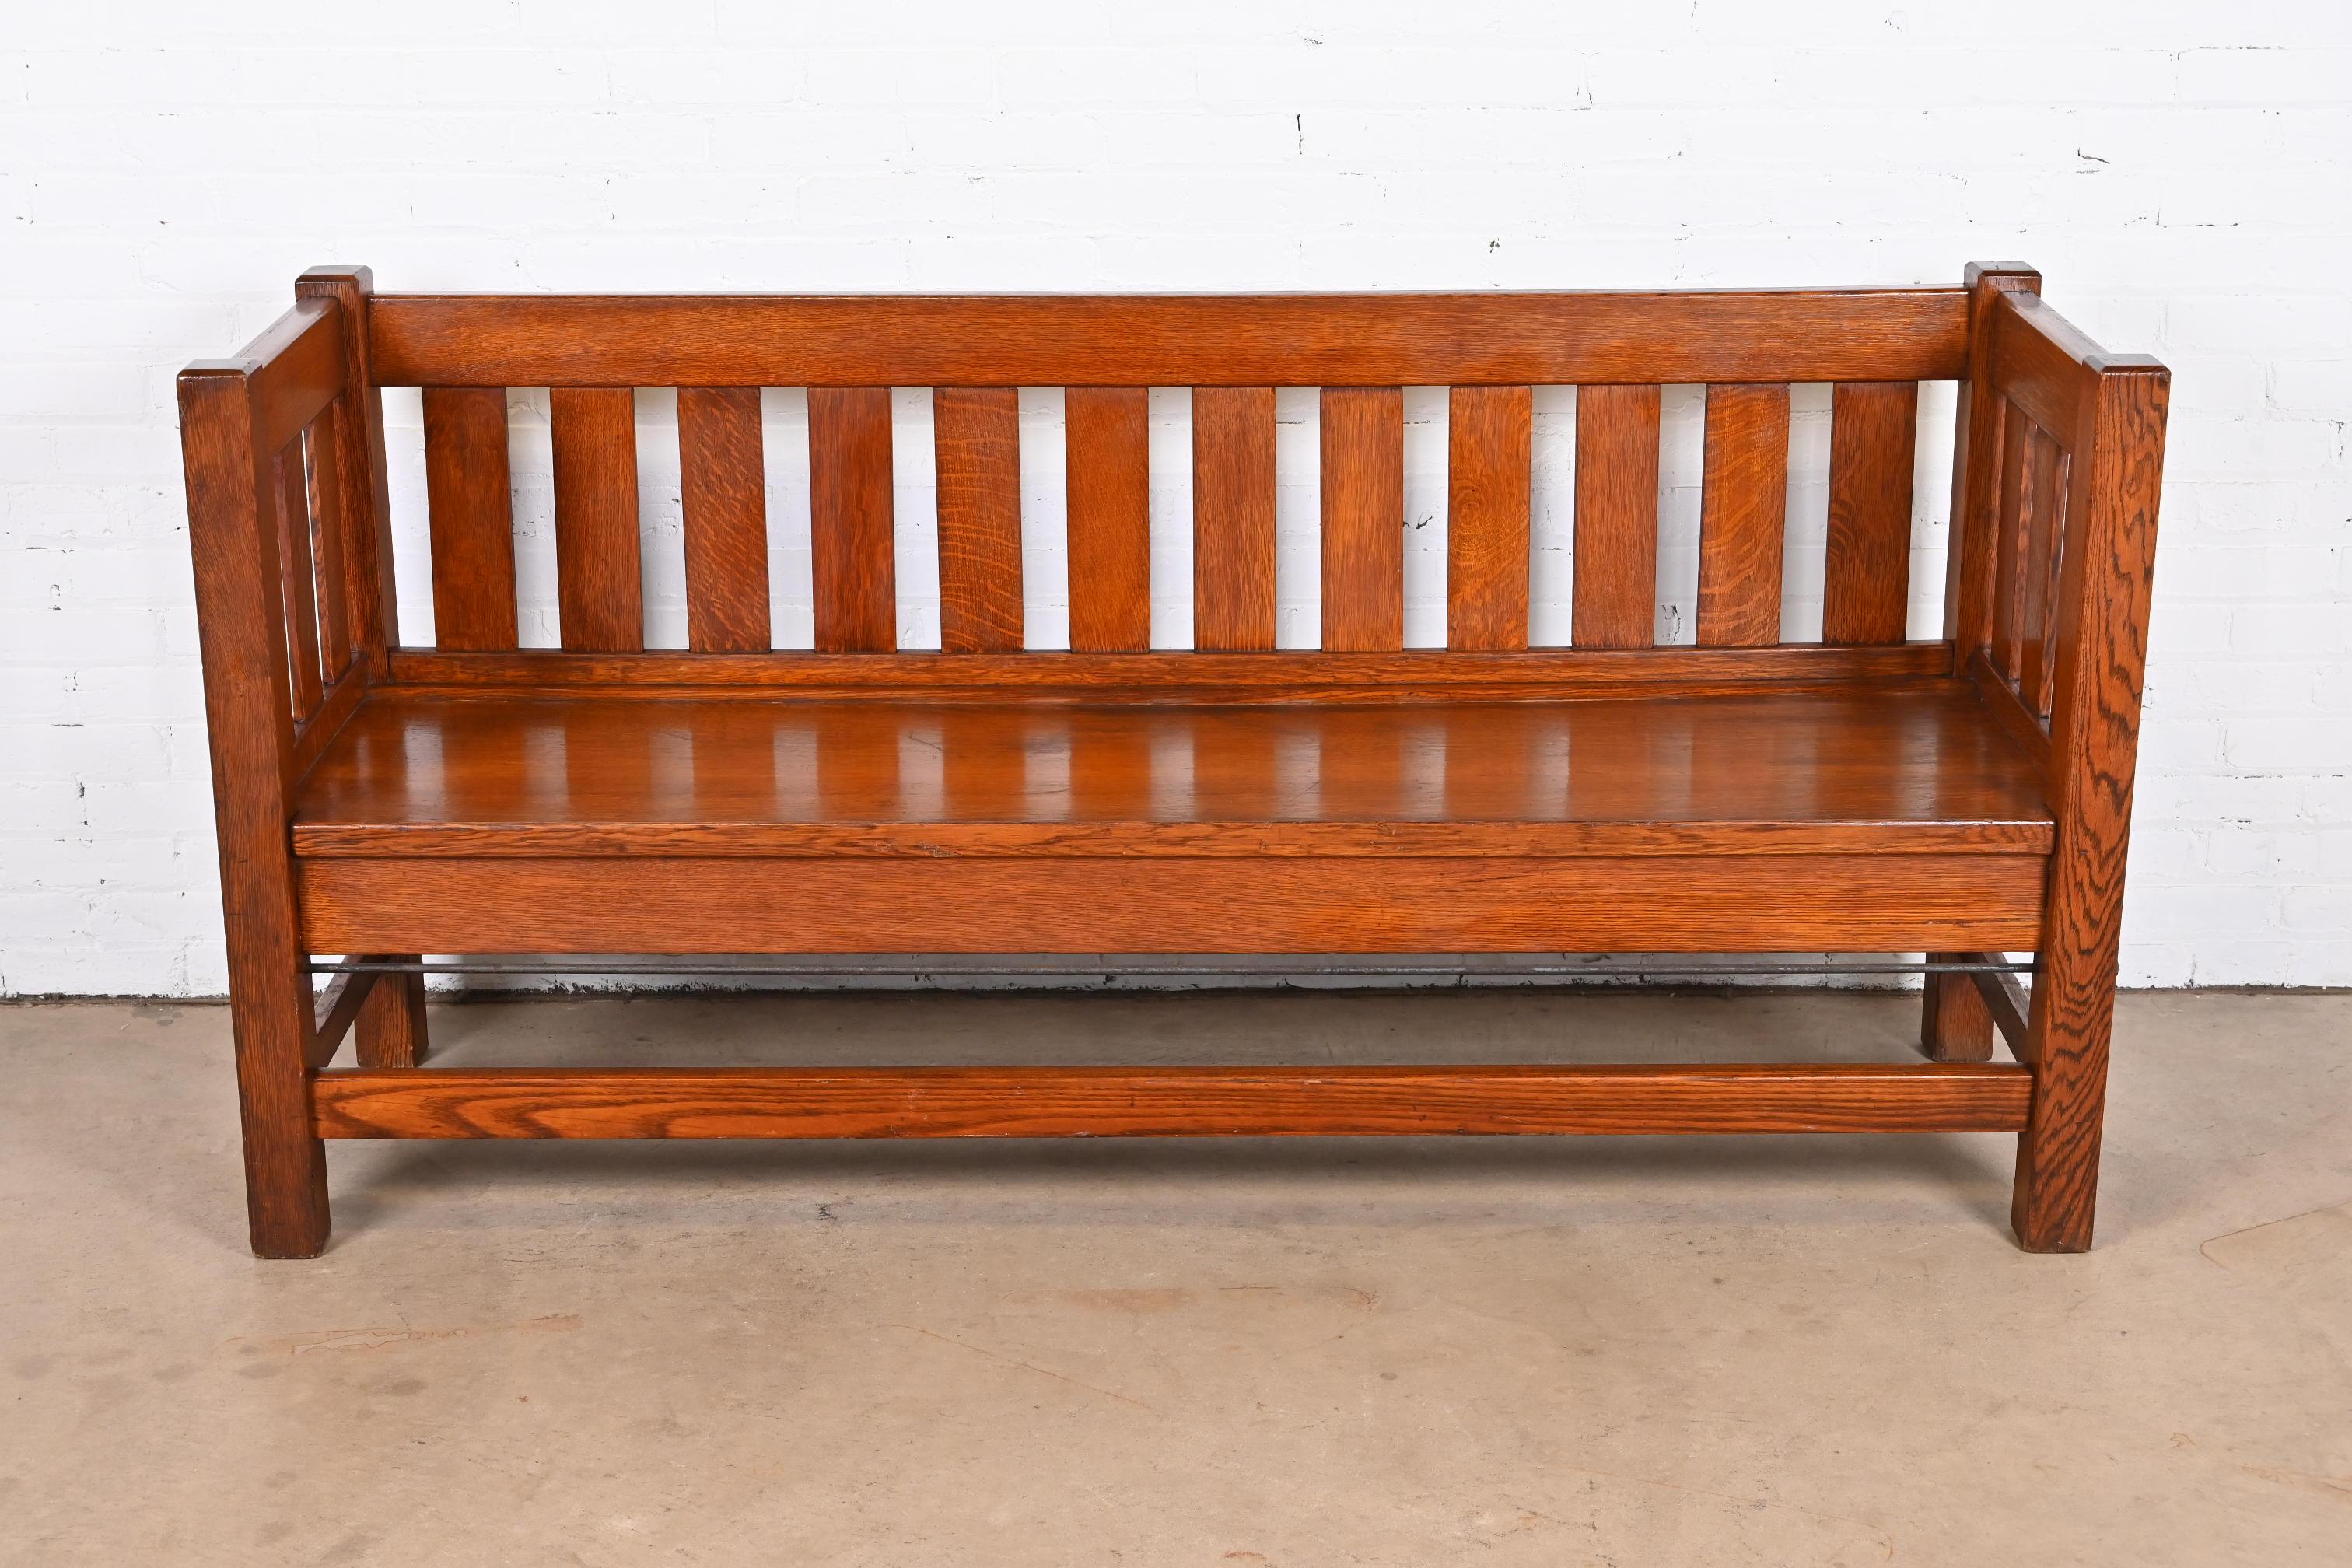 A beautiful Mission oak Arts & Crafts settle sofa or bench

In the manner of Stickley

USA, Early 20th century

Measures: 71.63